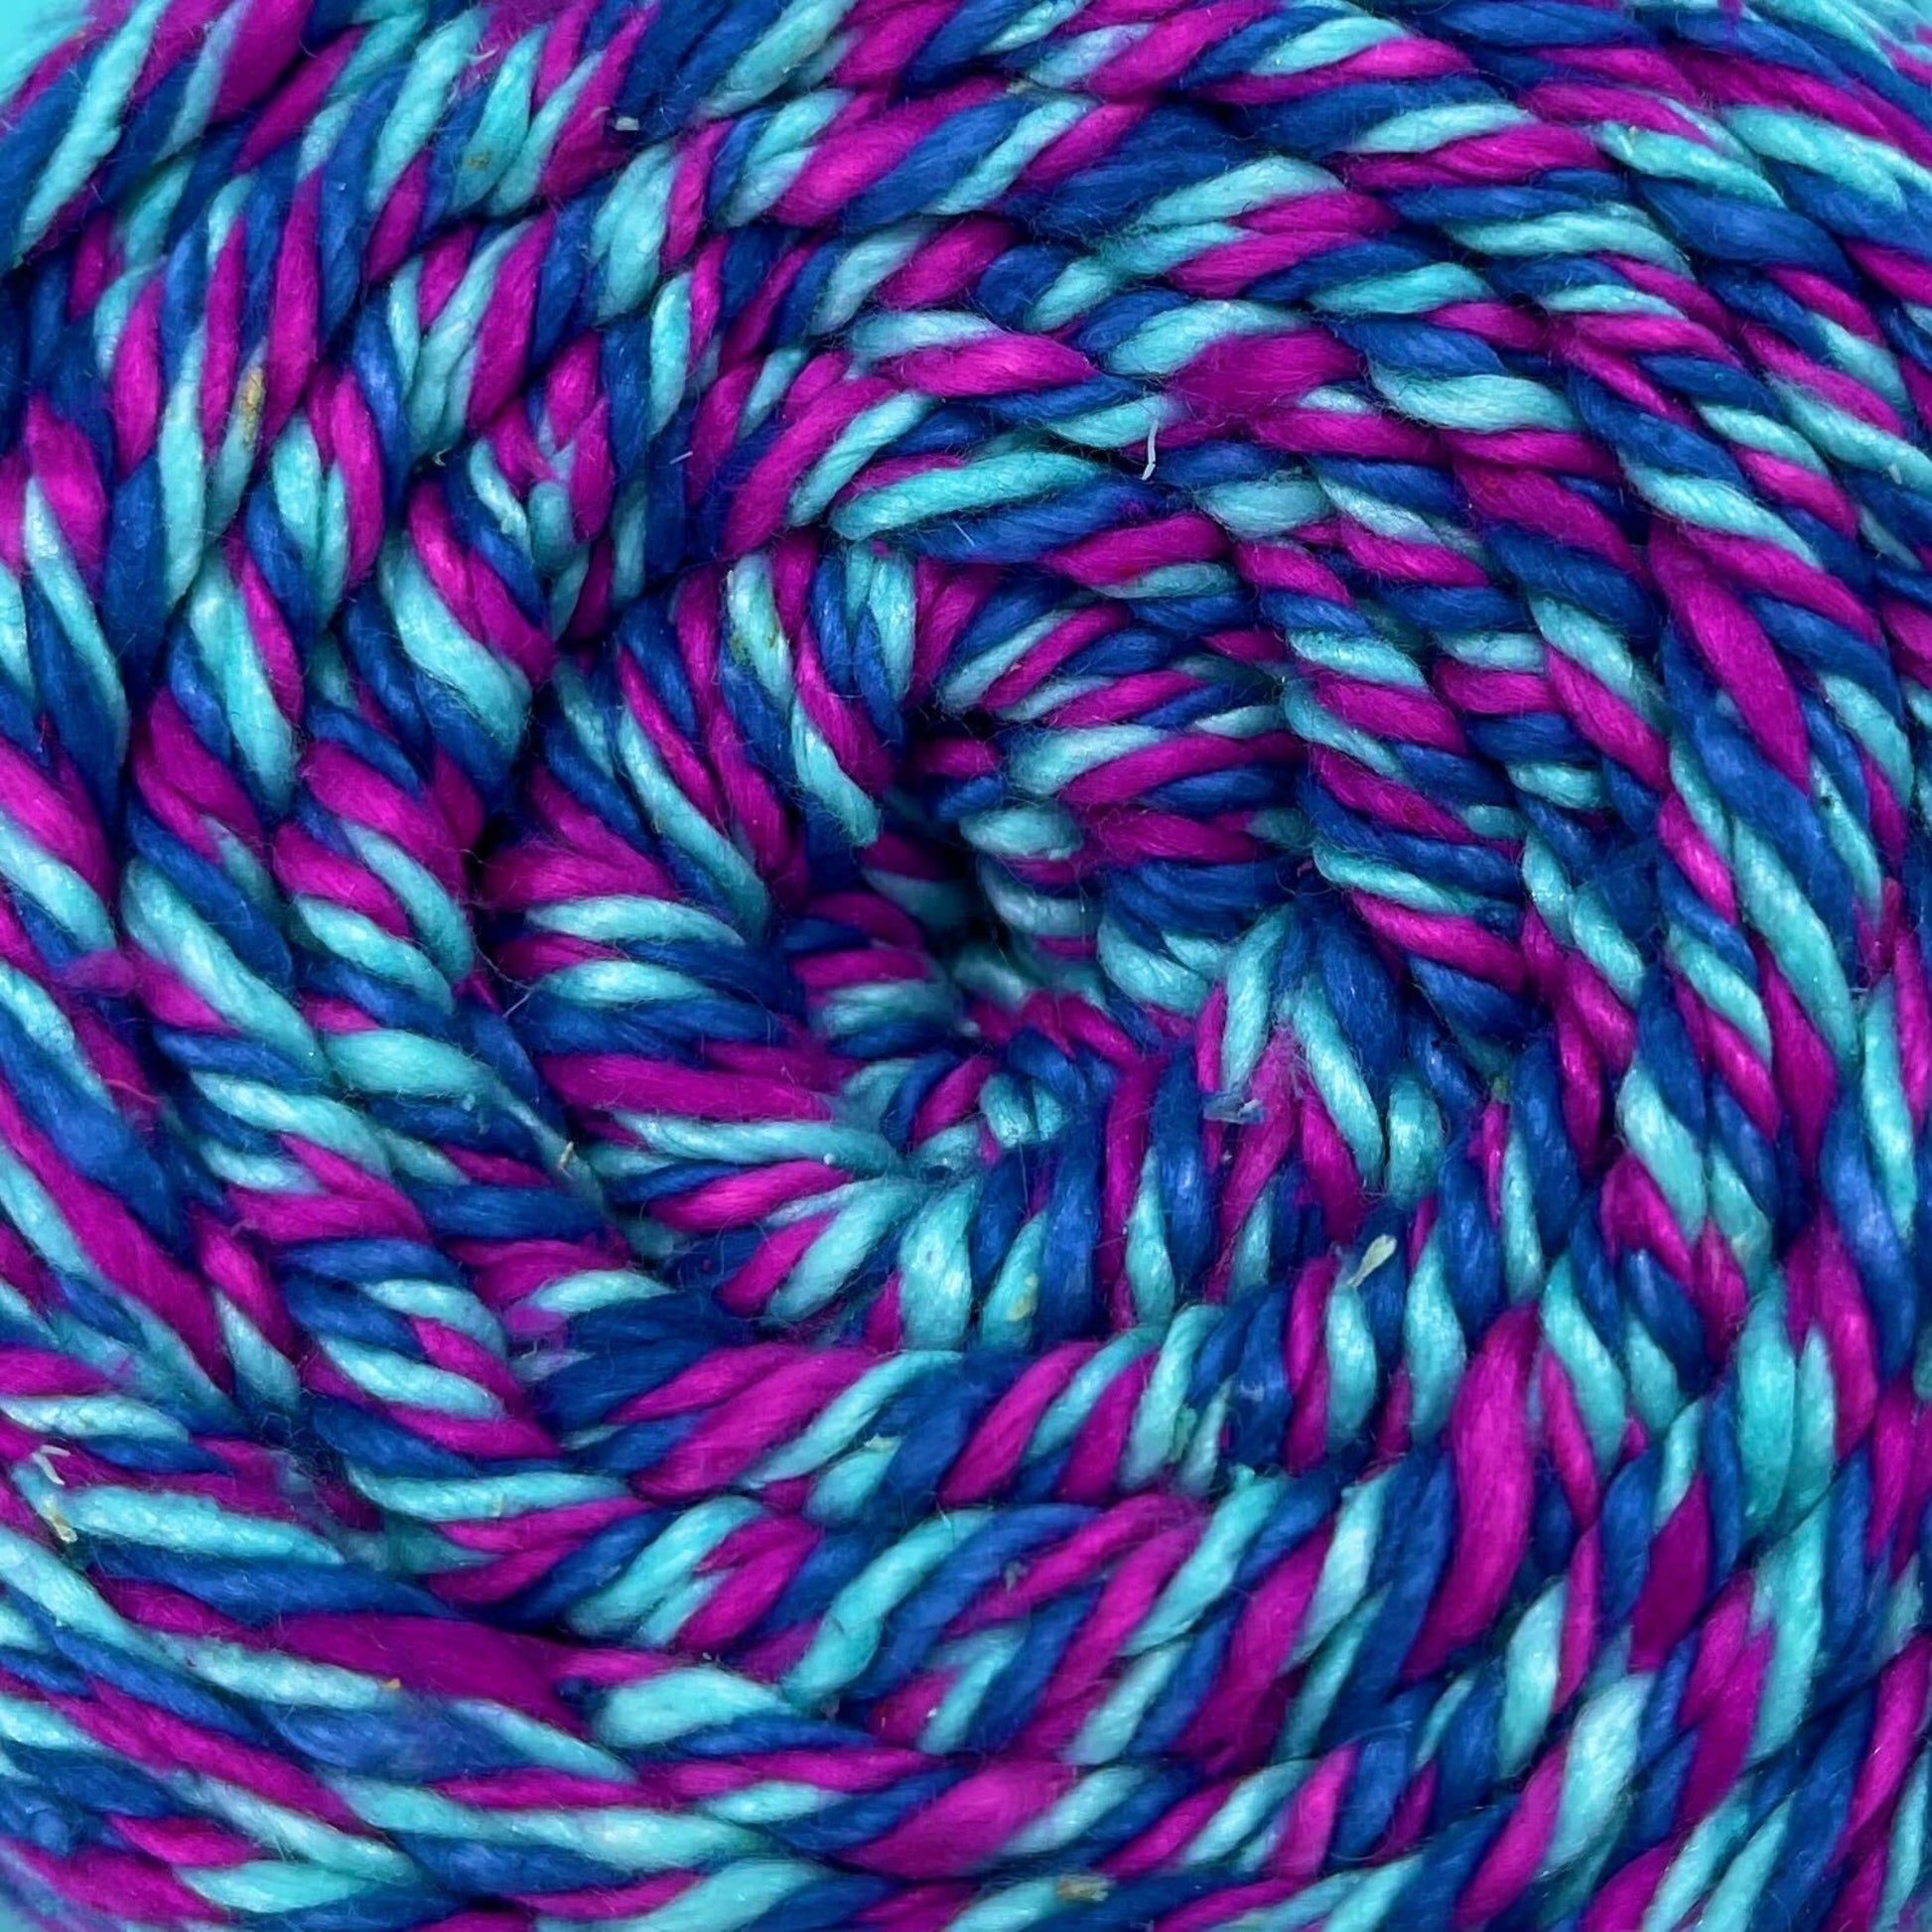 A close up of a skein of reclaimed silk yarn on a white background. The yarn is a triple ply yarn with pink, turquoise and navy colors.